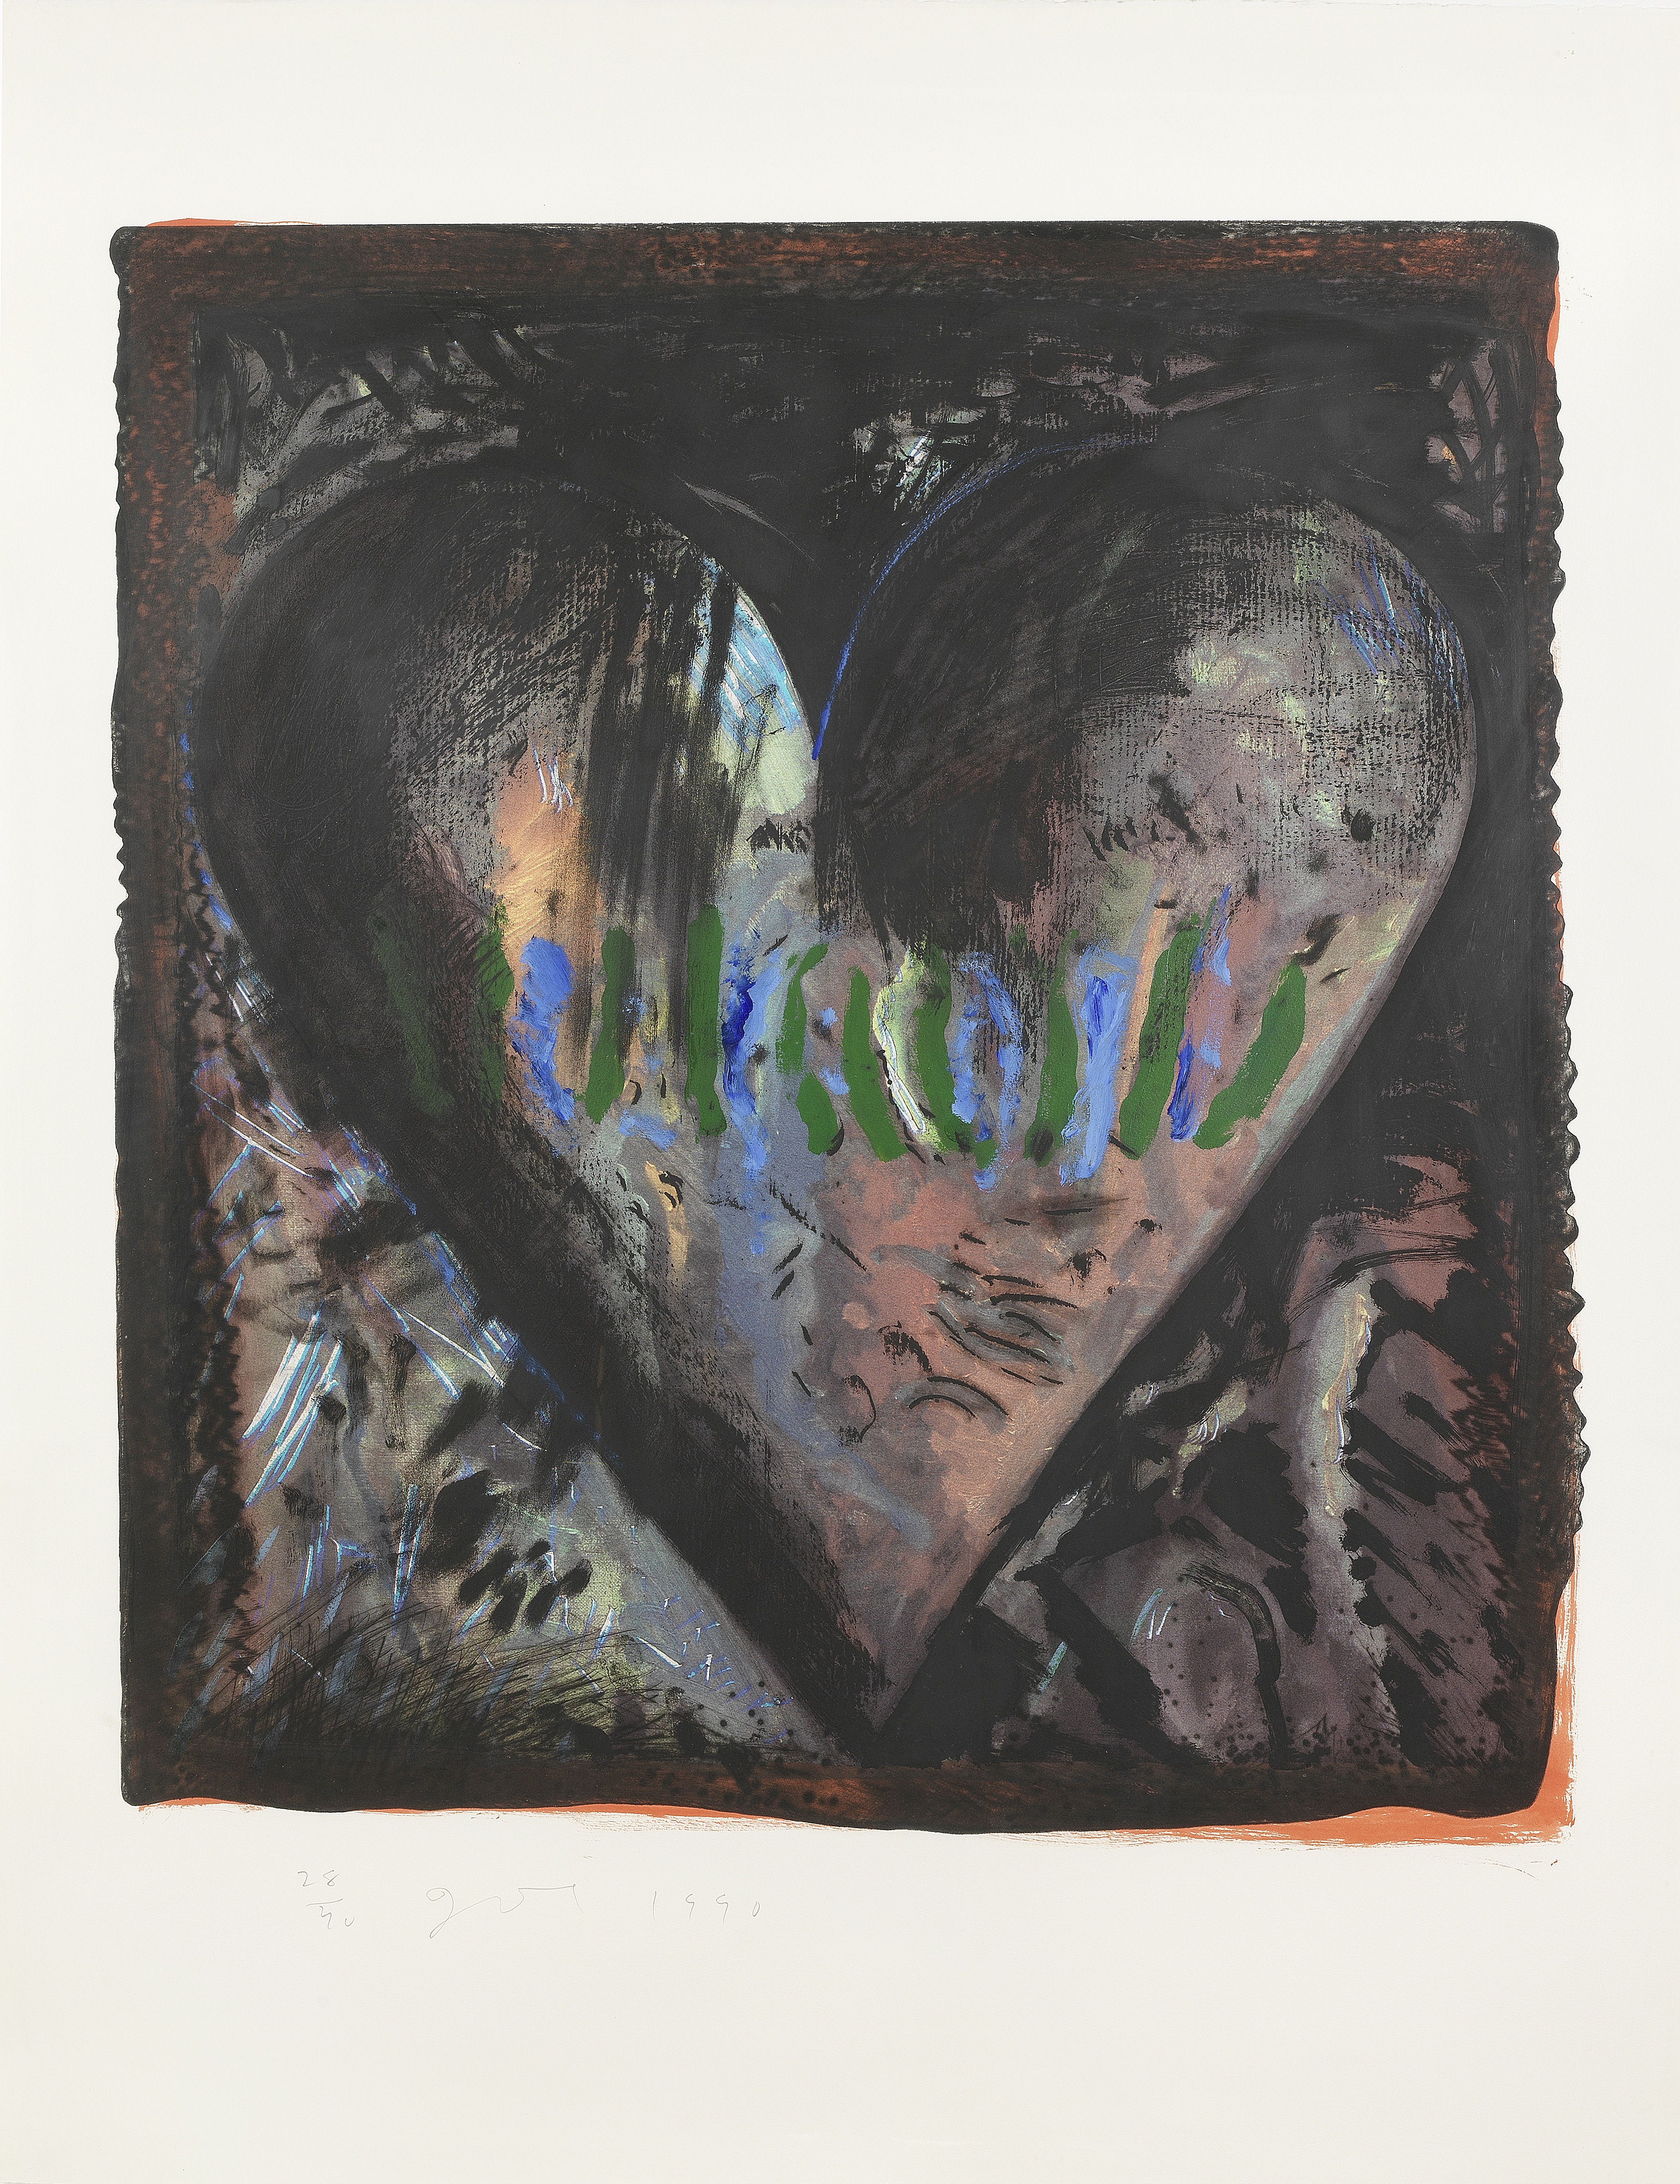 Jim Dine (born 1935) The Hand-Coloured Viennese Hearts The complete set of seven screenprints wit...